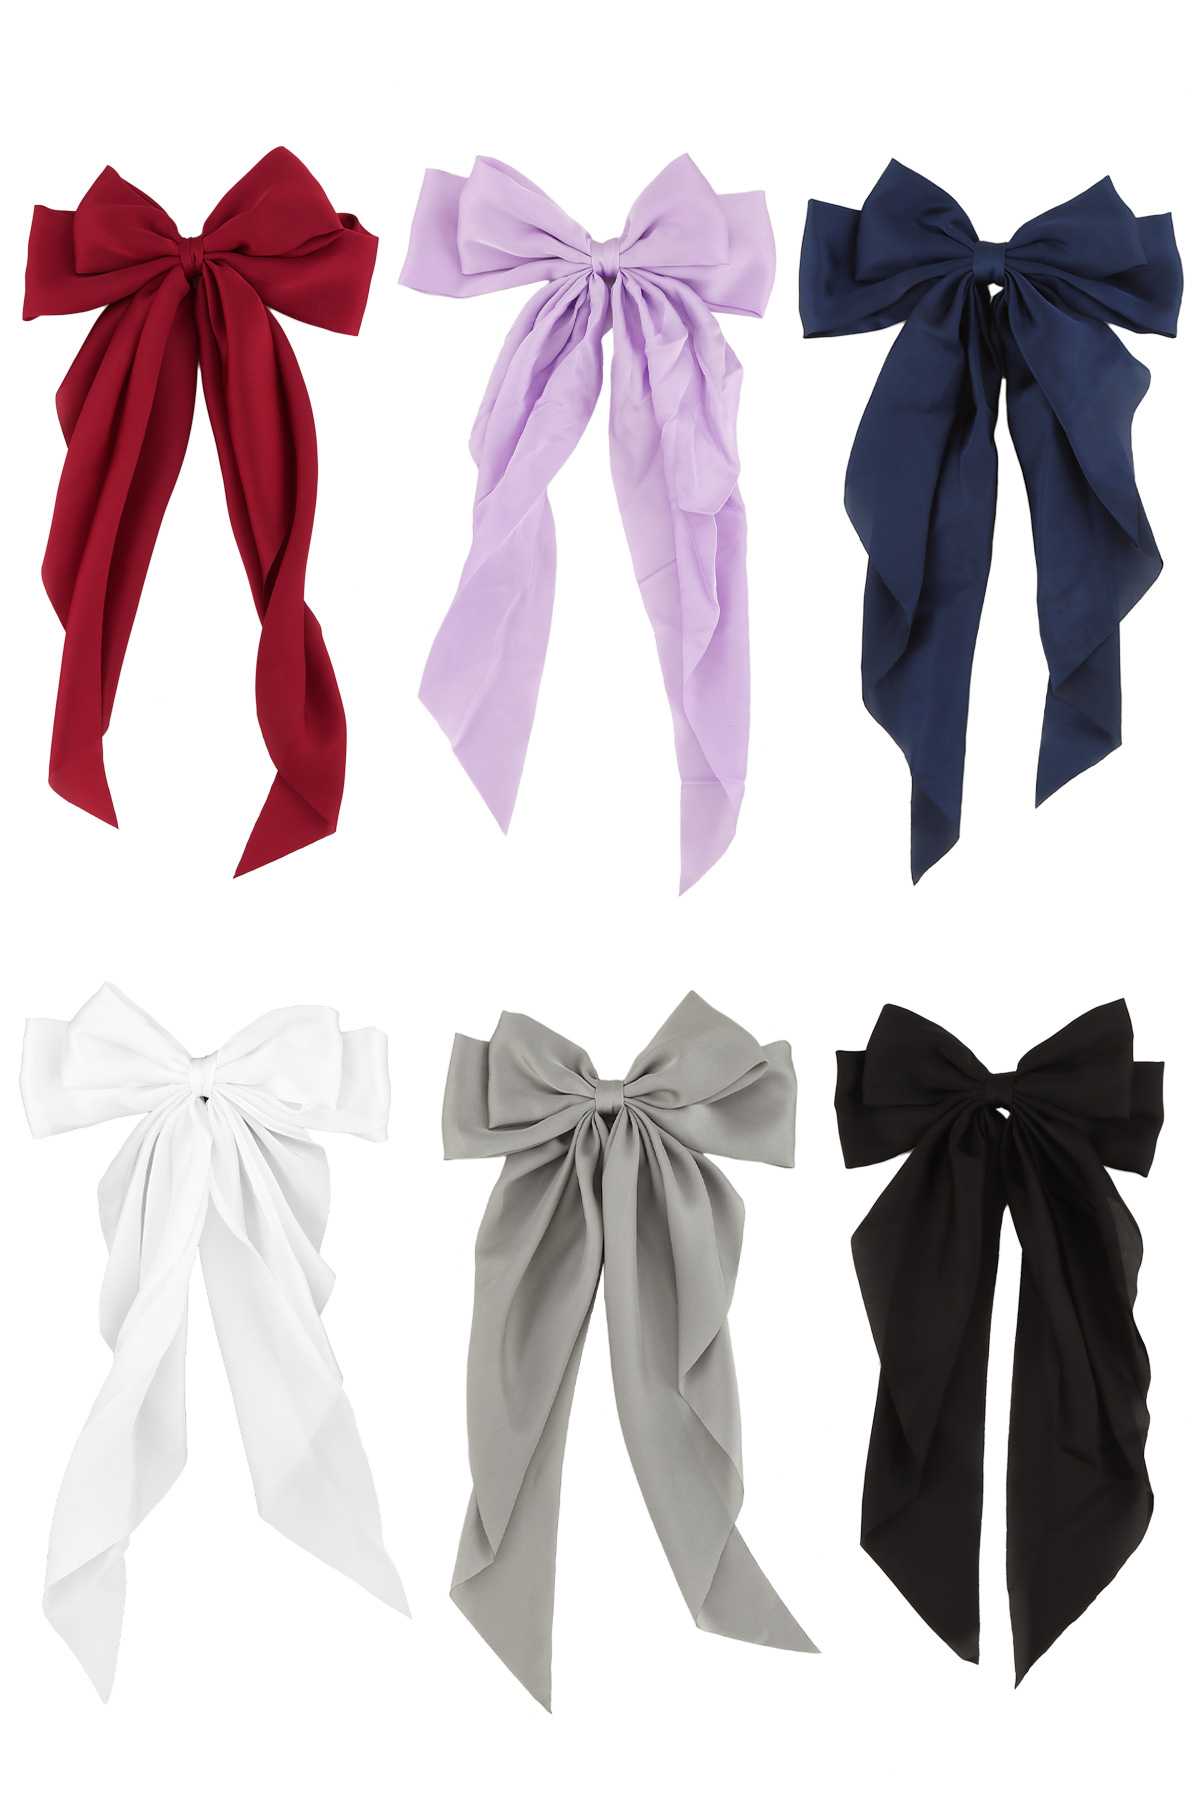 12 PIECES ASSORTED RIBBON HAIR CLIP